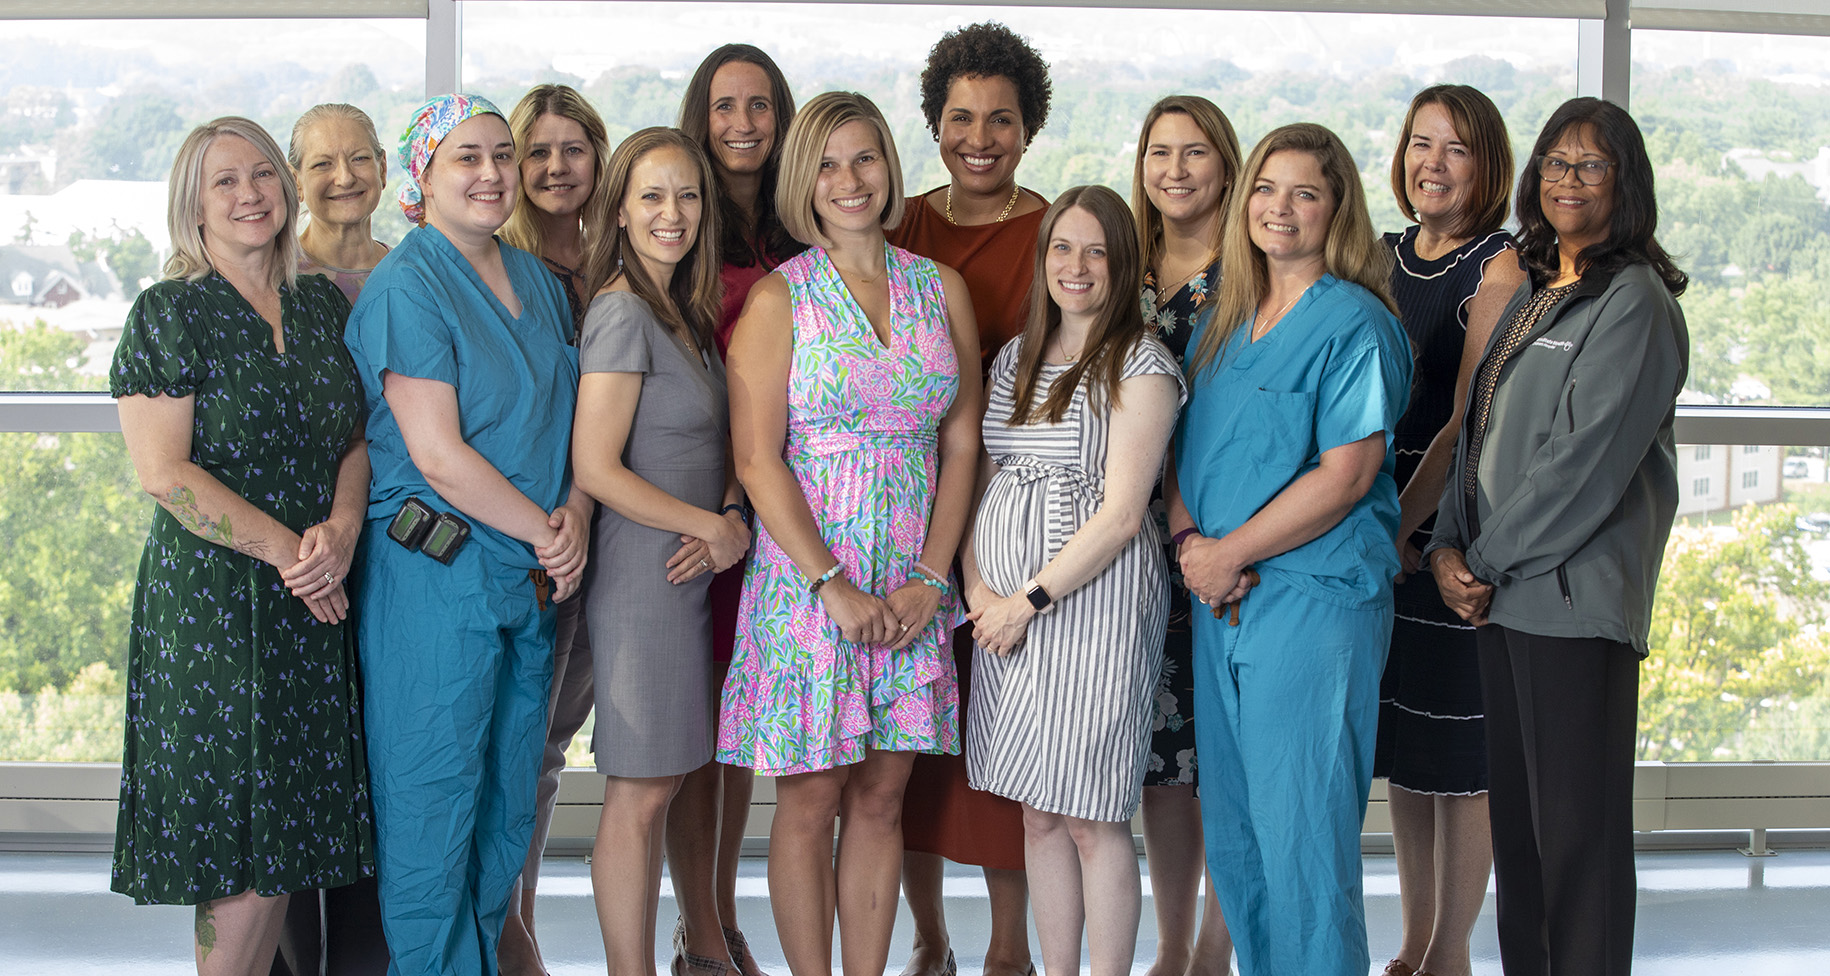 Thirteen members of the Division of Academic Specialists in Obstetrics and Gynecology pose in front of an upper floor window of Penn State Health Children's Hospital.